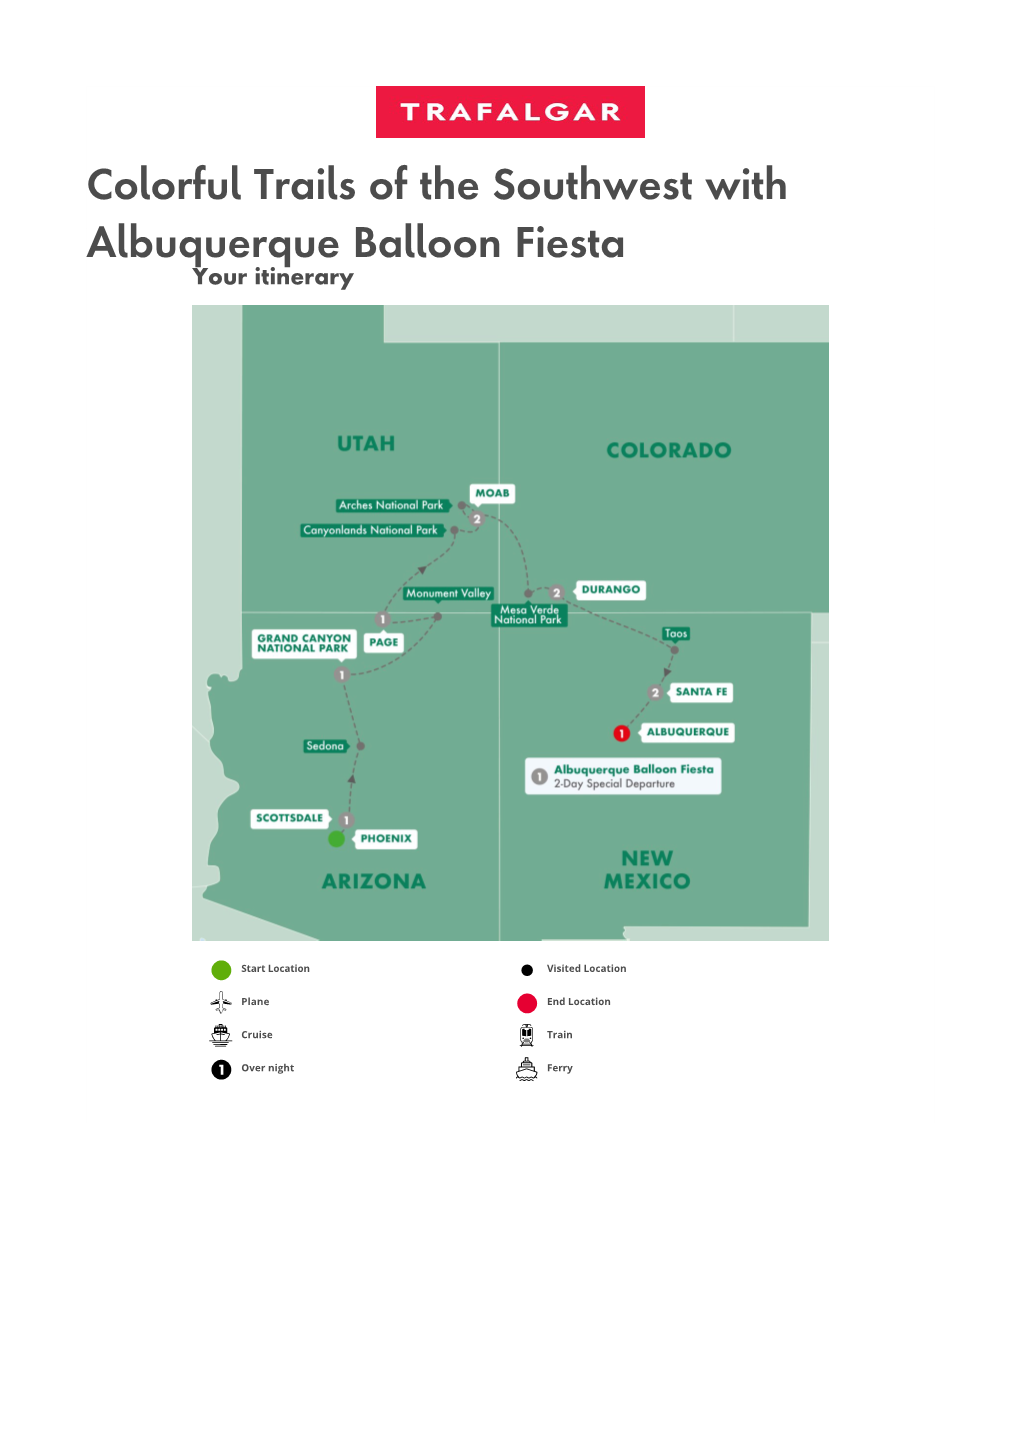 Colorful Trails of the Southwest with Albuquerque Balloon Fiesta Your Itinerary